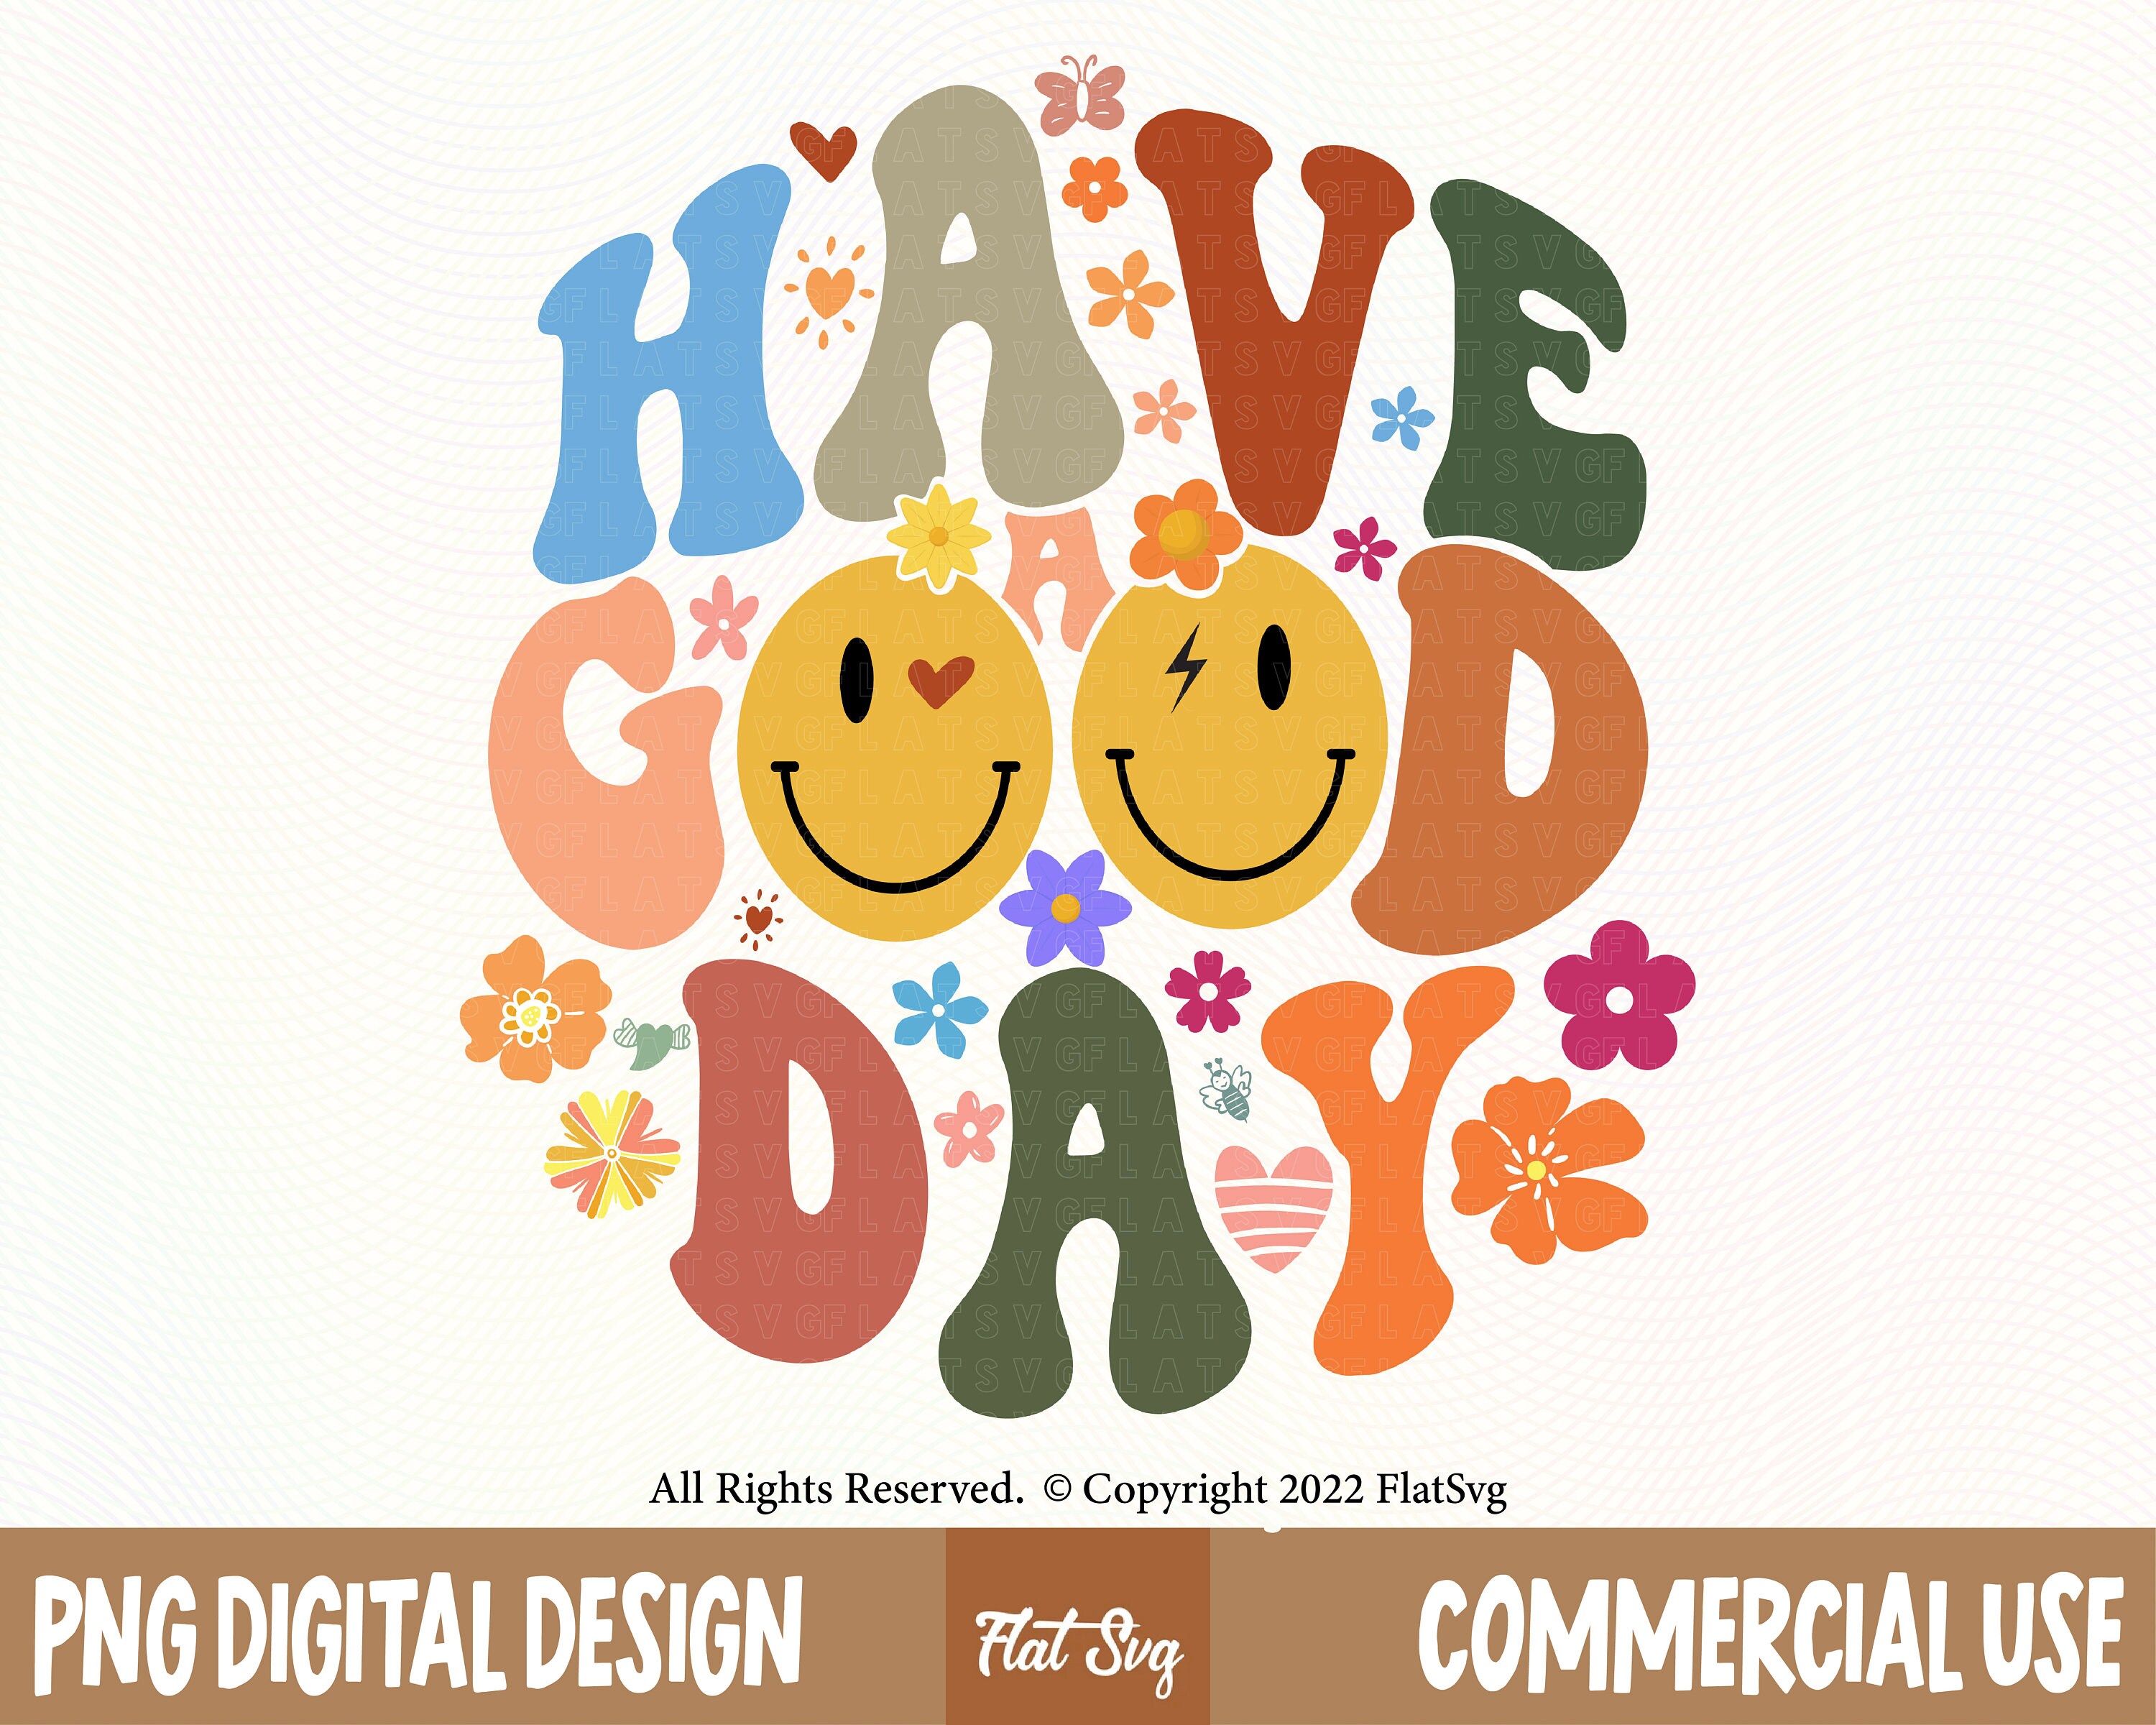 Instant Digital Download  Clipart File Every Day Is A Good Day To Have A Good Day PNG Happy Face PNG For Print and Sublimation